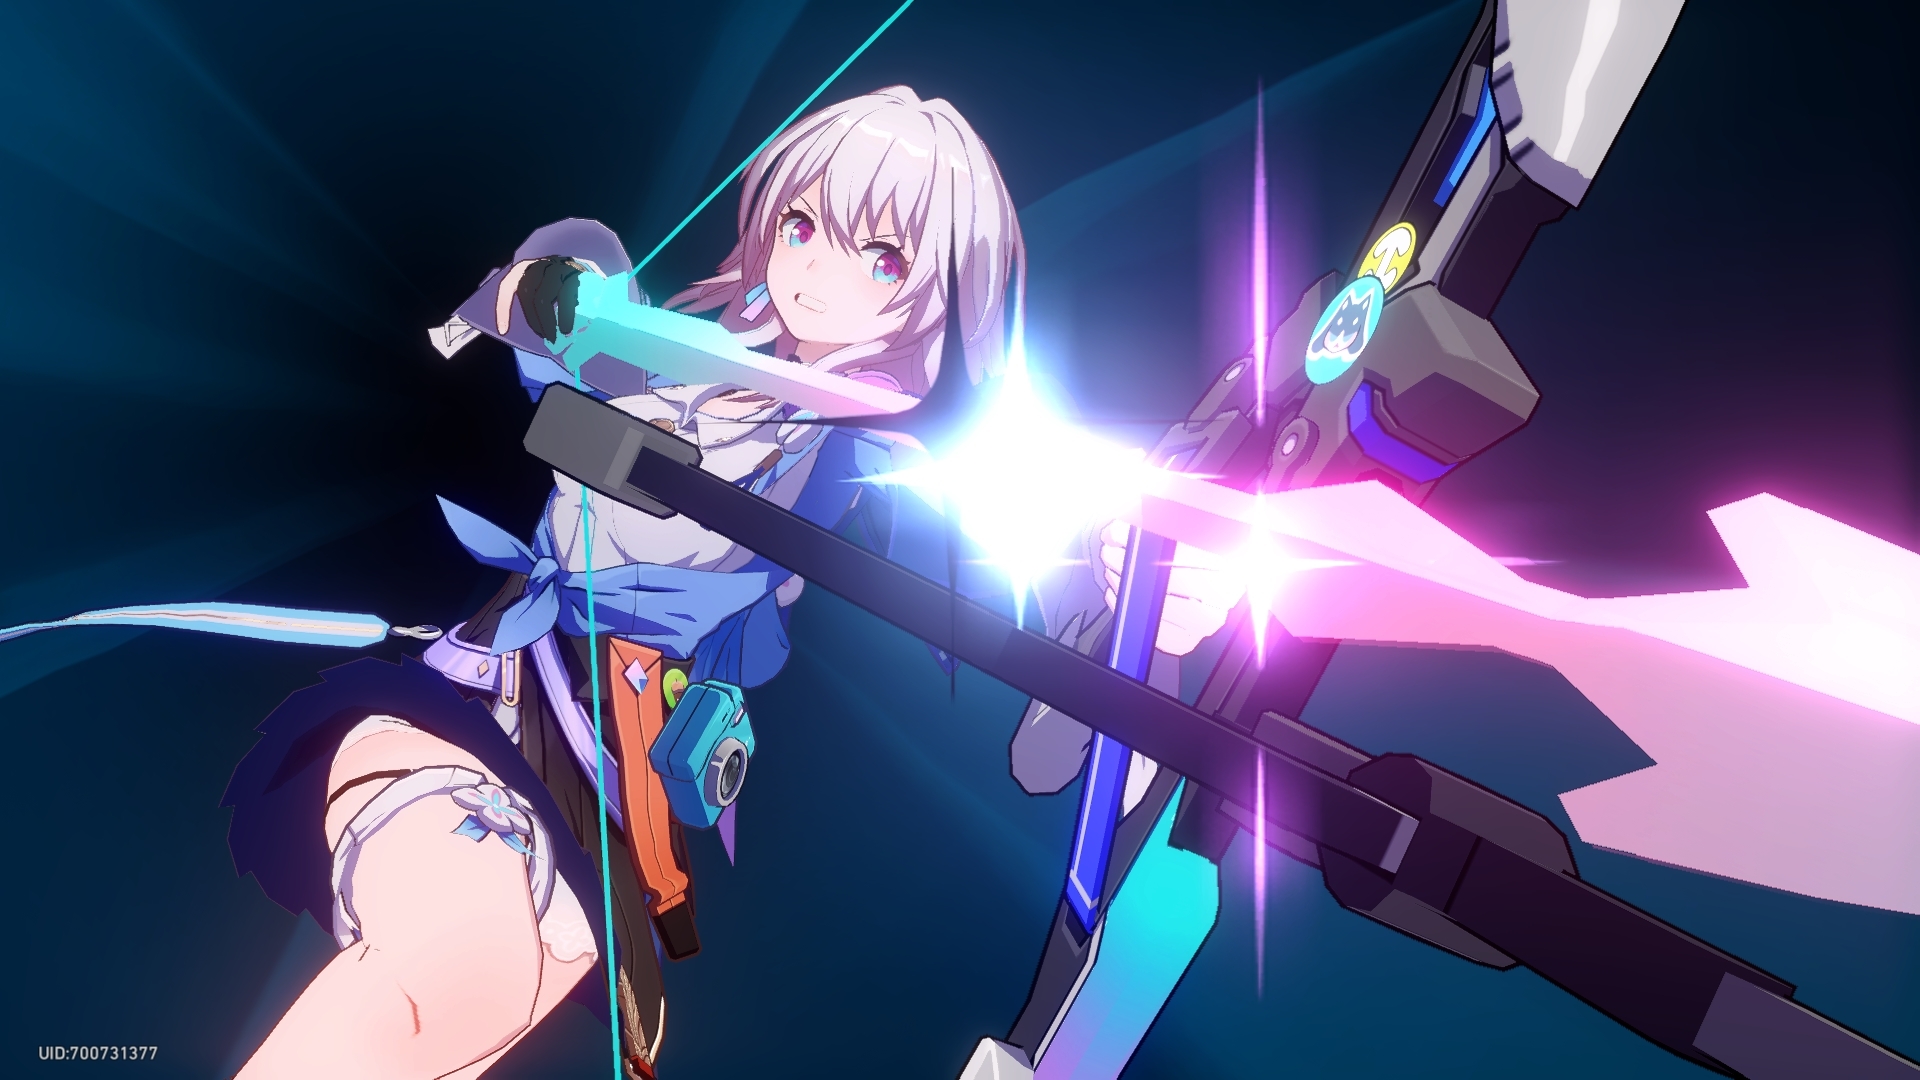 Is Honkai Star Rail on PS4 and PS5? - Answered